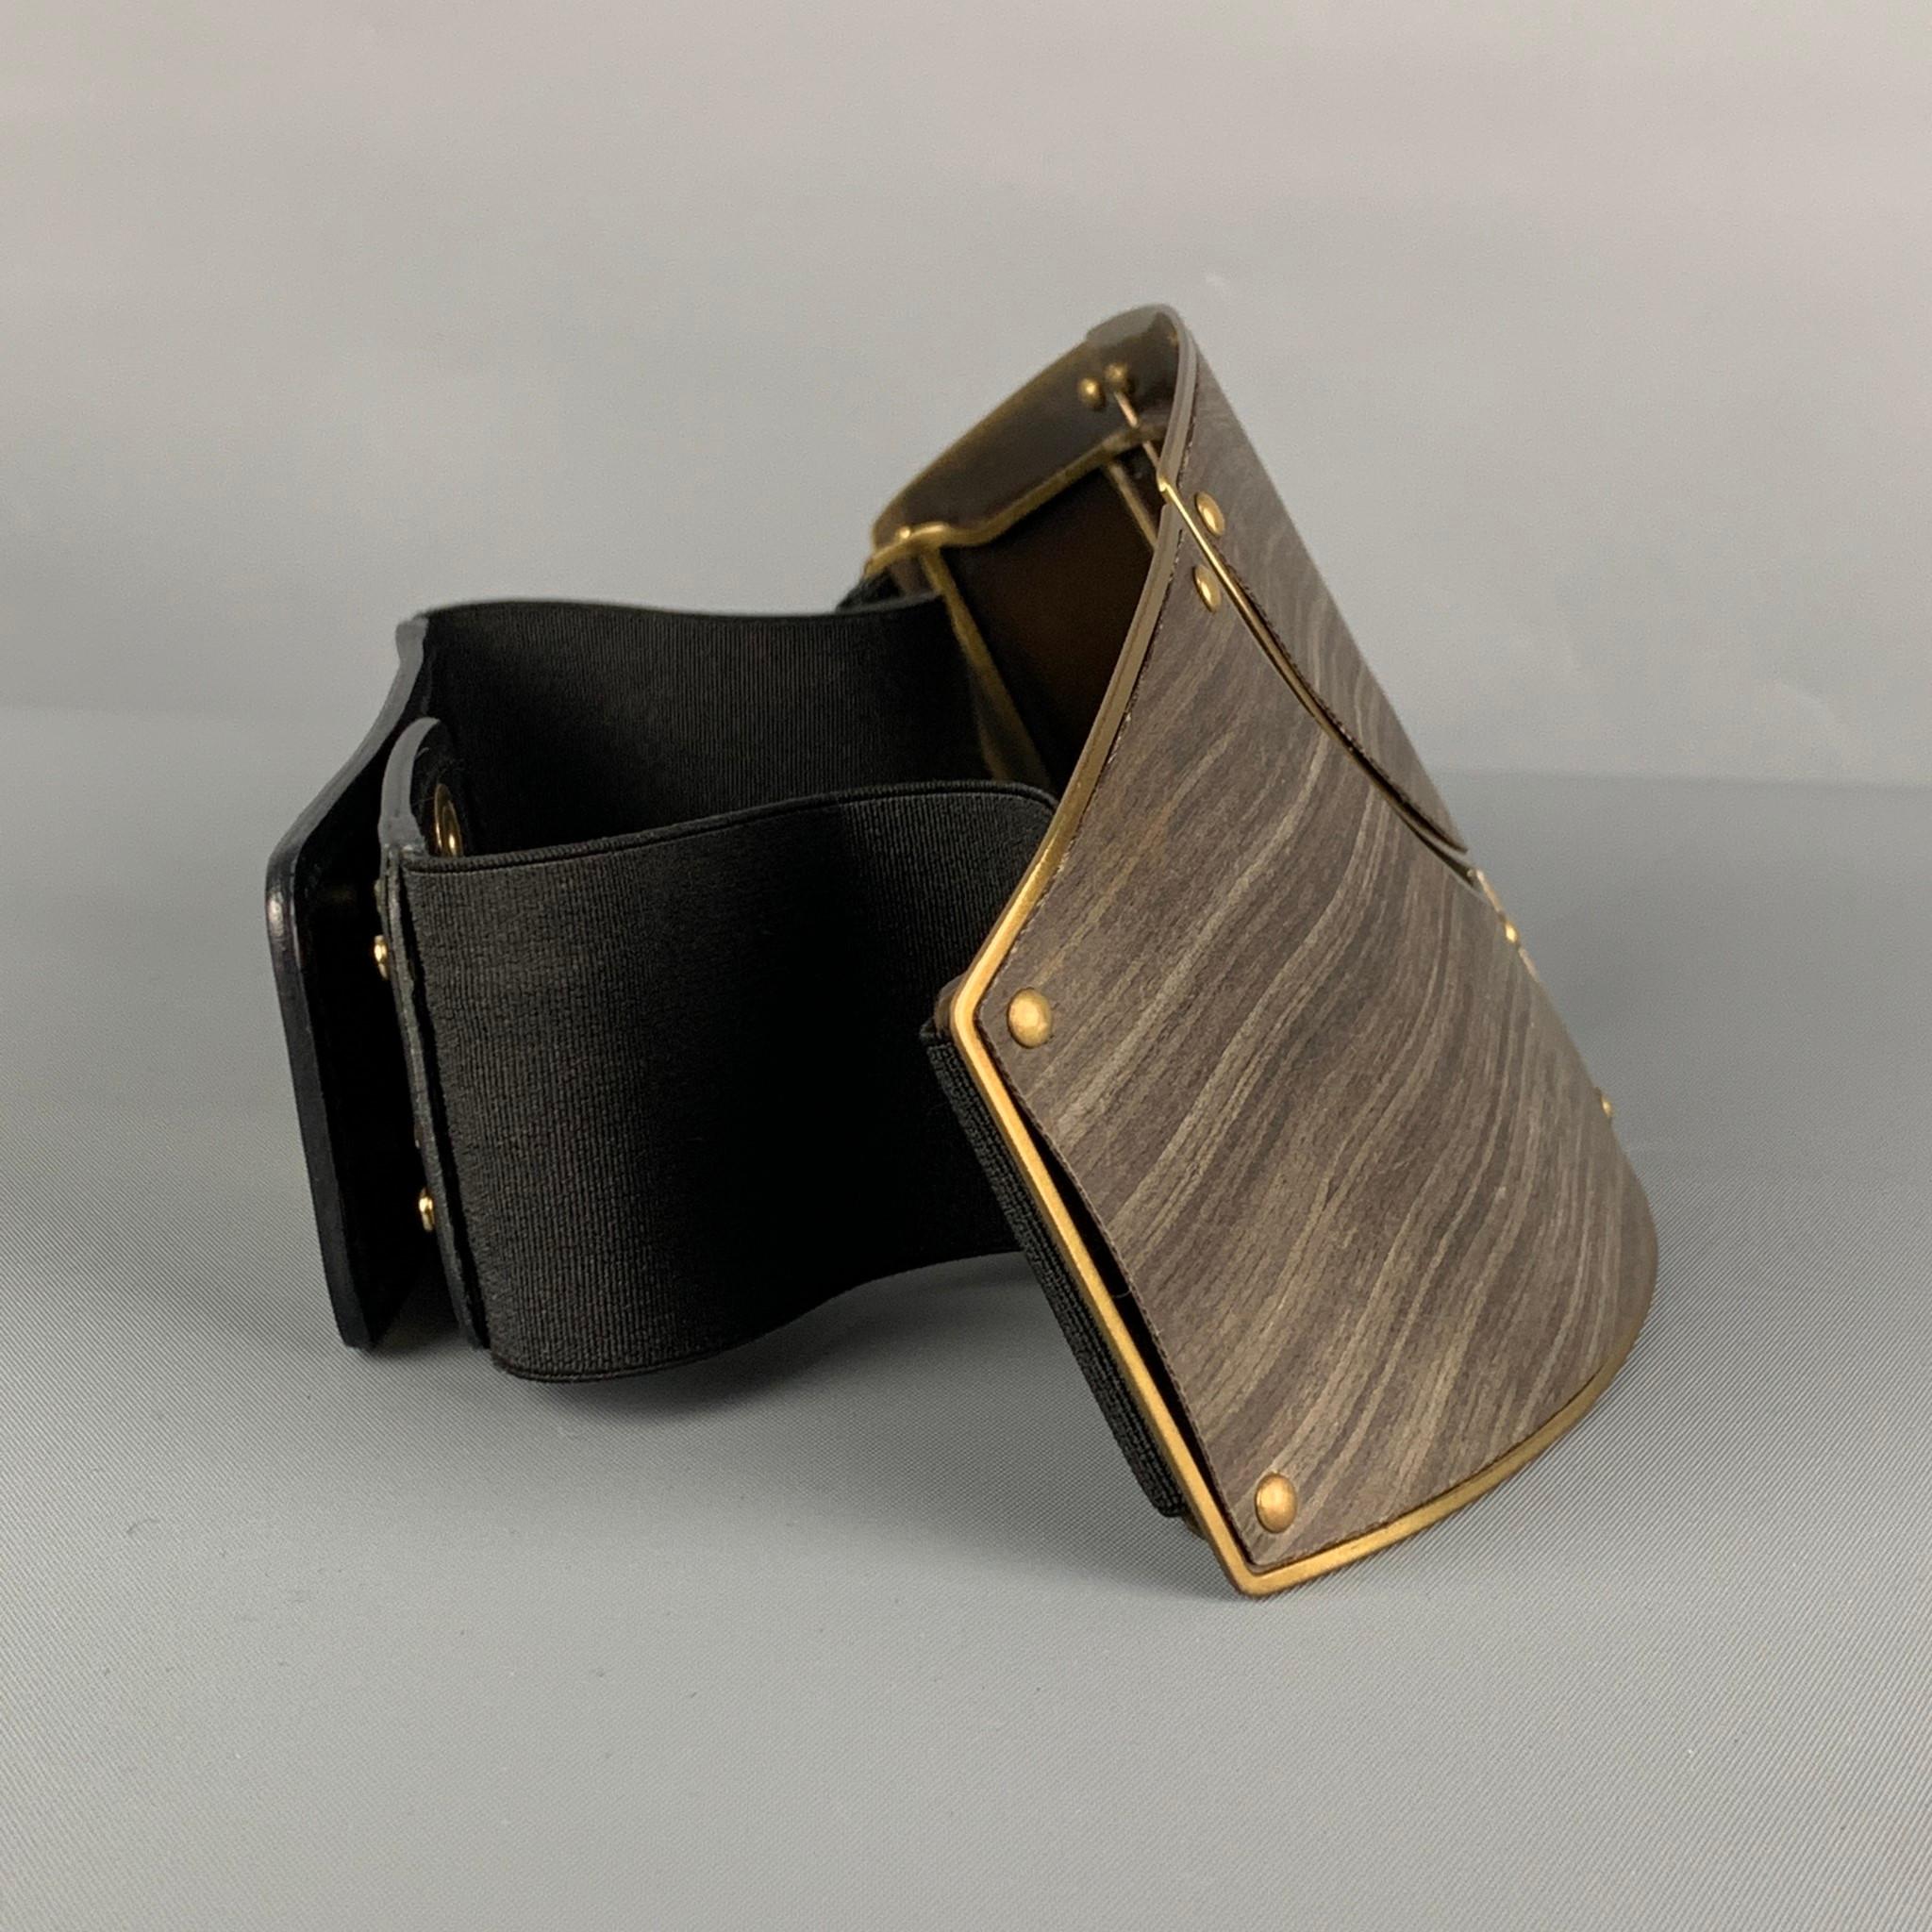 LANVIN belt comes in a brown metal featuring a large plate design, gold tone hardware, leather trim, black elastic strap, and a snap button closure. Made in Italy. 

Very Good Pre-Owned Condition.
Marked: S
Original Retail Price: $1,565.00

Length: